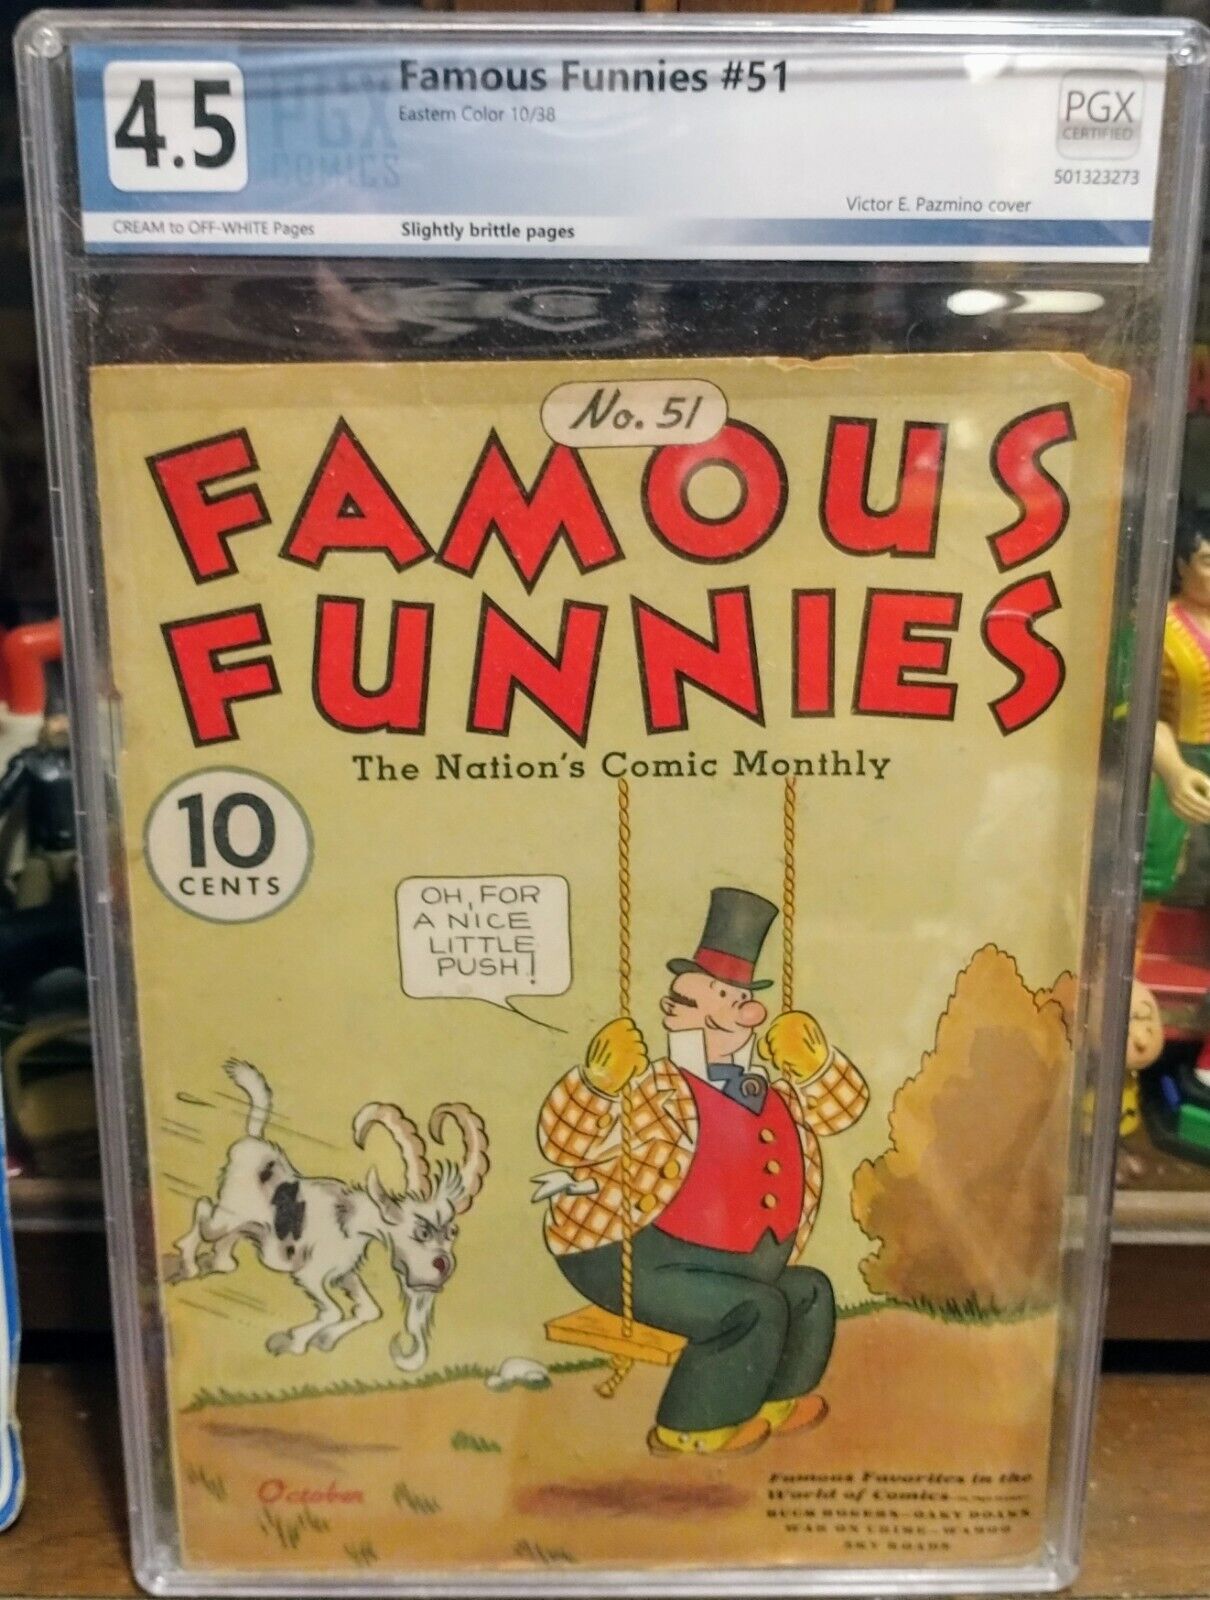 FAMOUS FUNNIES #51 (1938) EASTERN COLOR EARLY GOLDEN AGE COMIC PGX 4.5 CTOWP